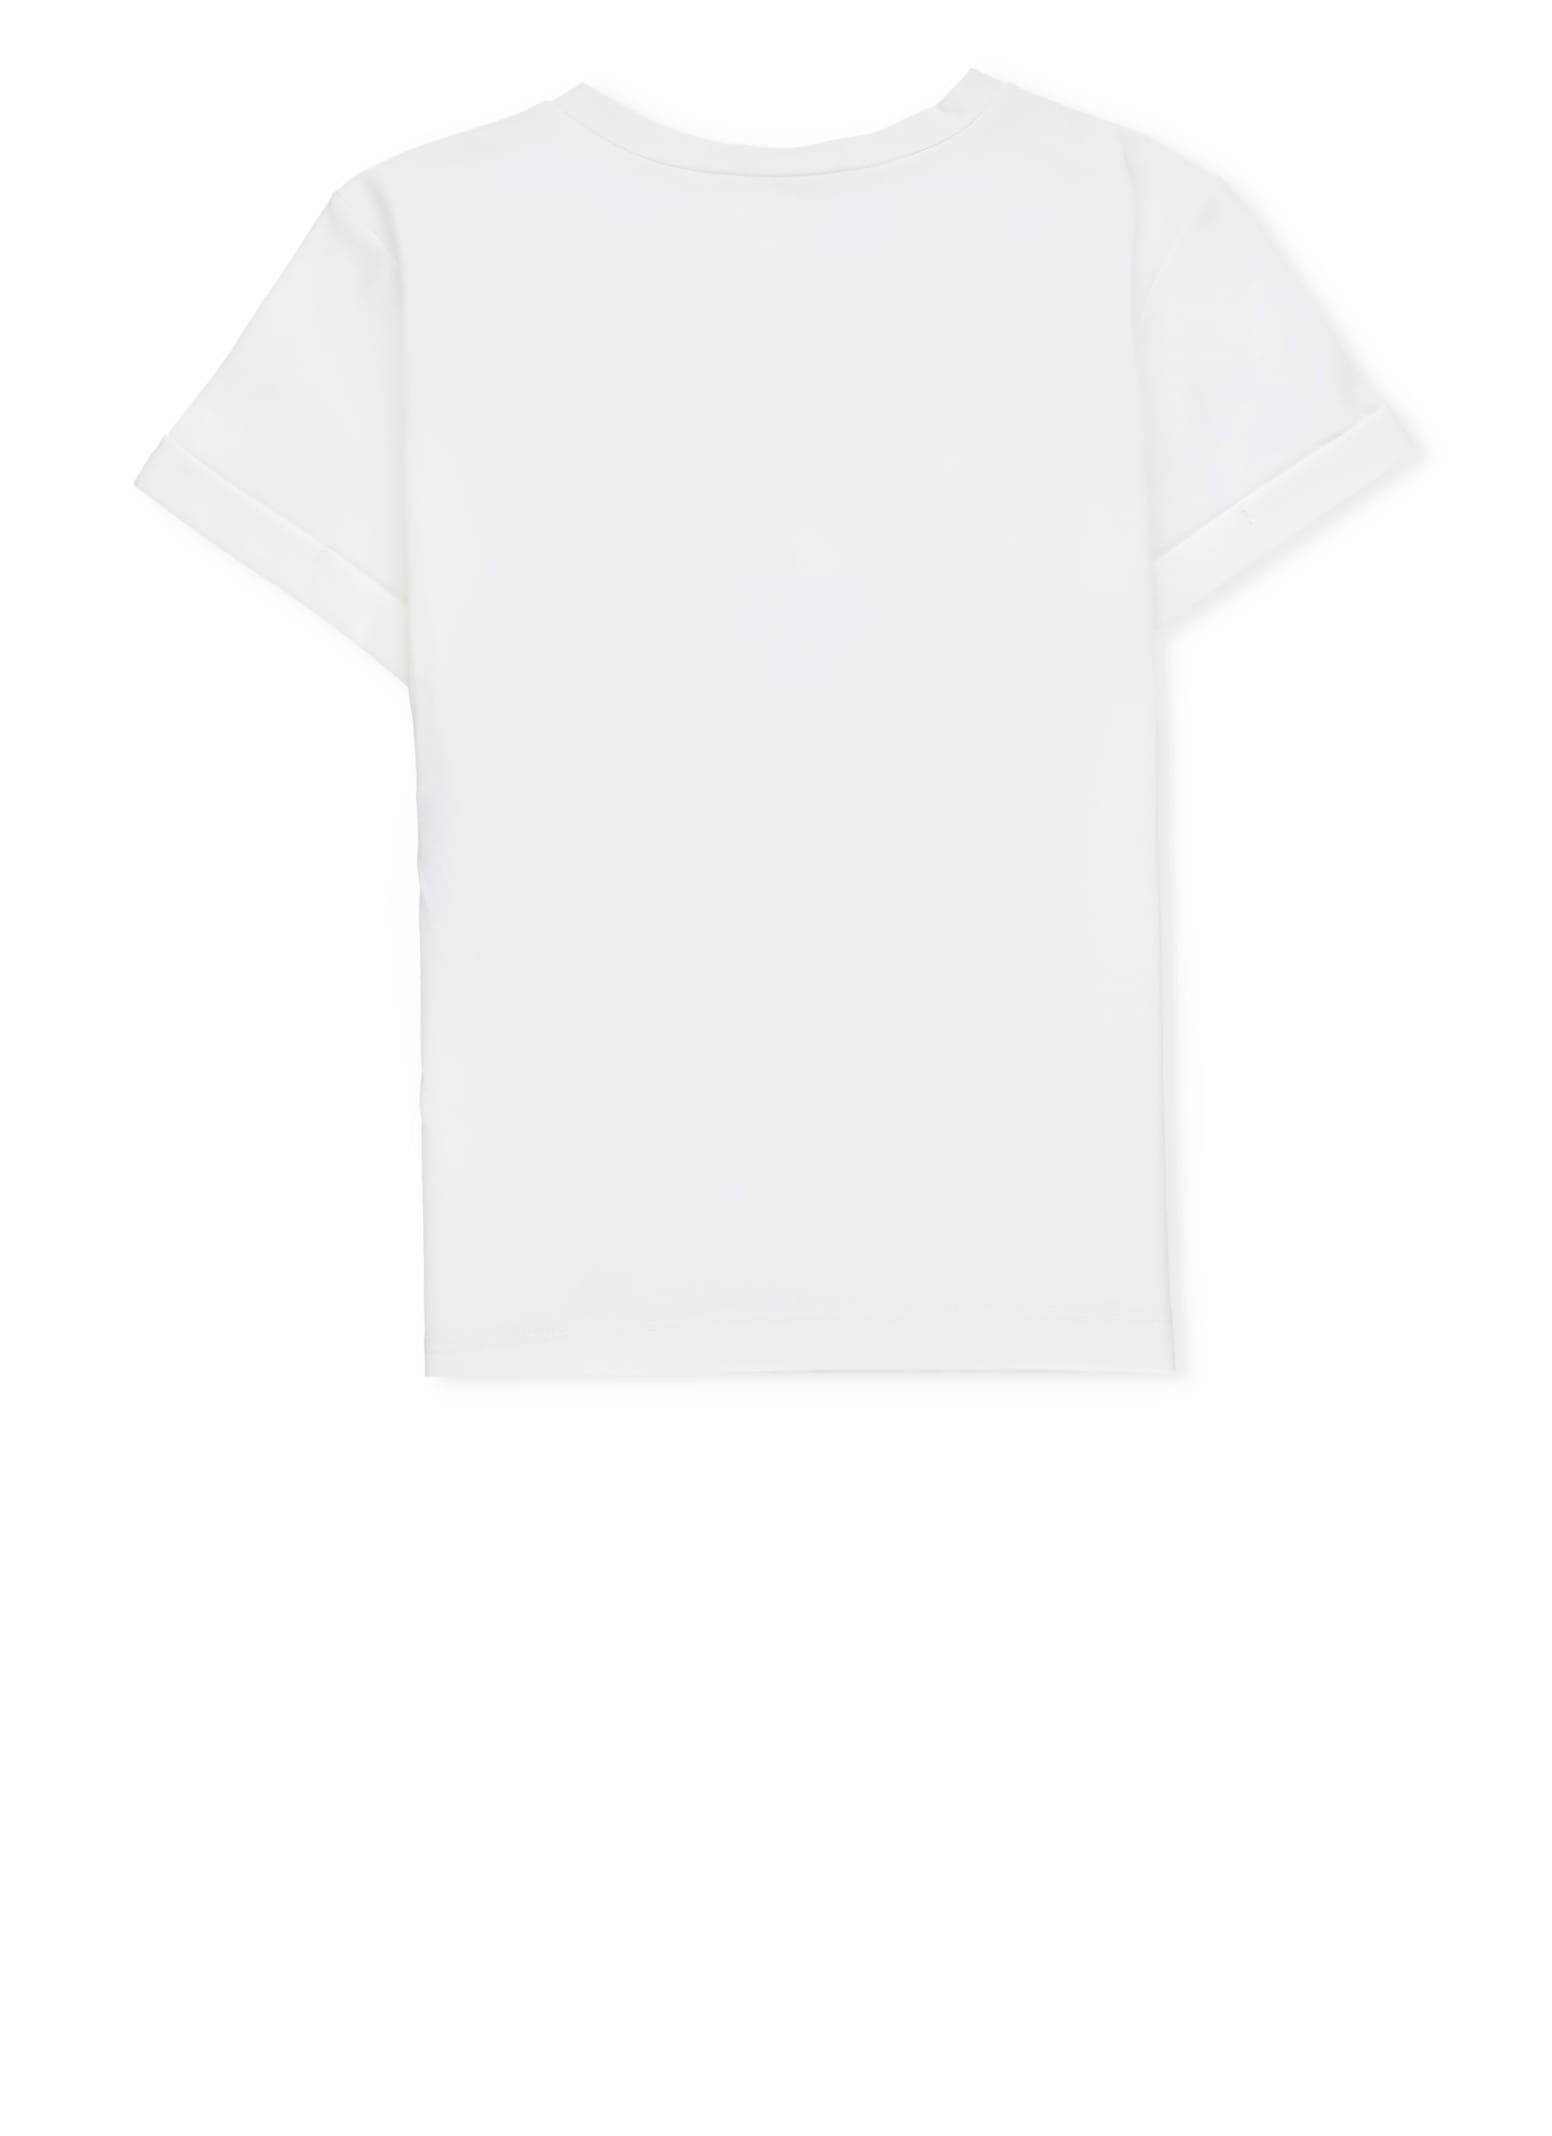 Shop Twinset T-shirt With Print In White